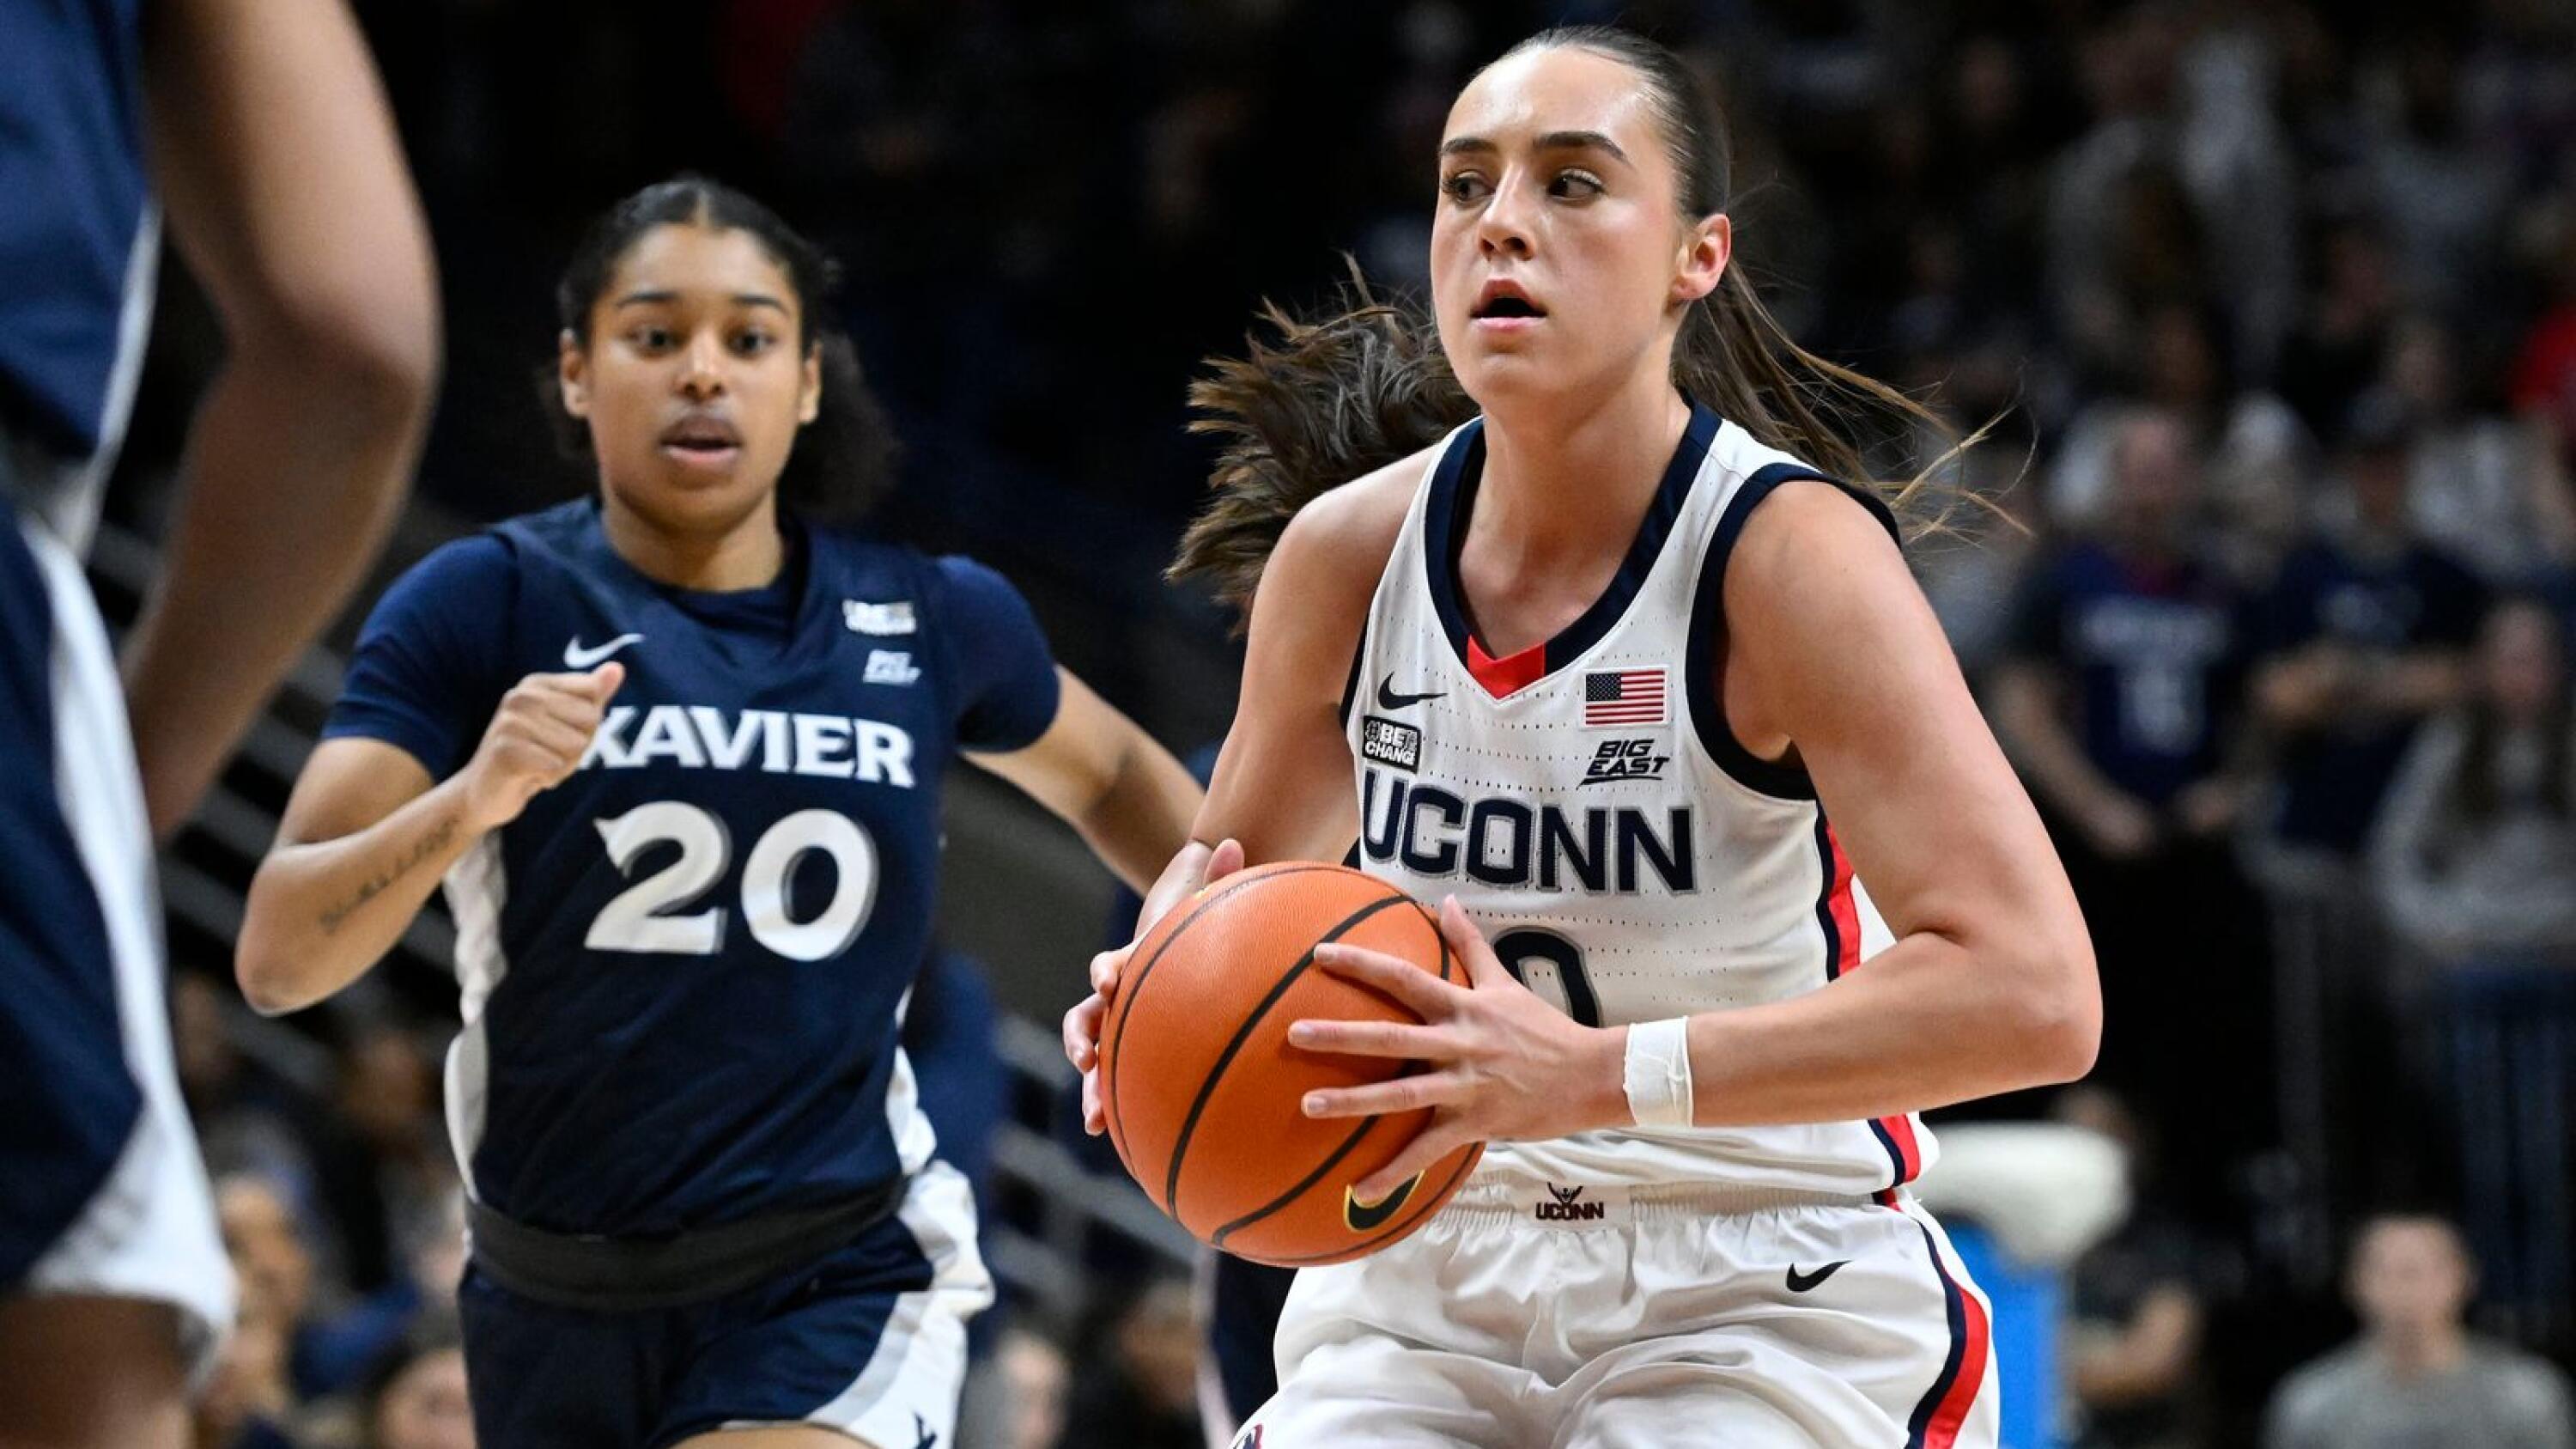 She’s not Sue Bird, but Nika Muhl is leading UConn into the Big East